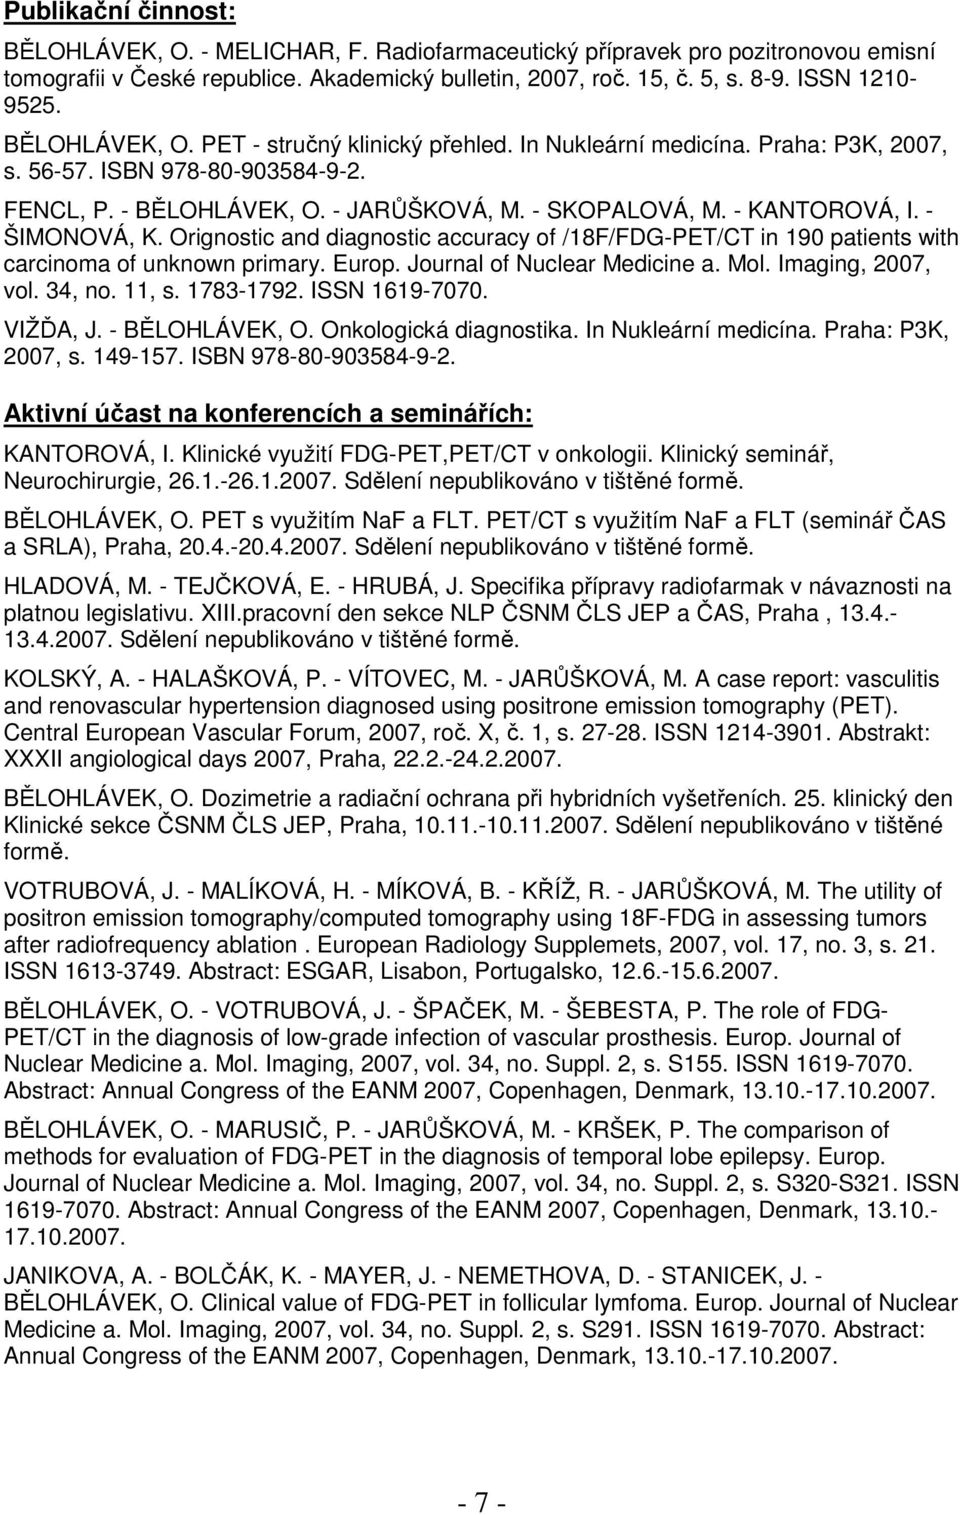 - ŠIMONOVÁ, K. Orignostic and diagnostic accuracy of /18F/FDG-PET/CT in 190 patients with carcinoma of unknown primary. Europ. Journal of Nuclear Medicine a. Mol. Imaging, 2007, vol. 34, no. 11, s.